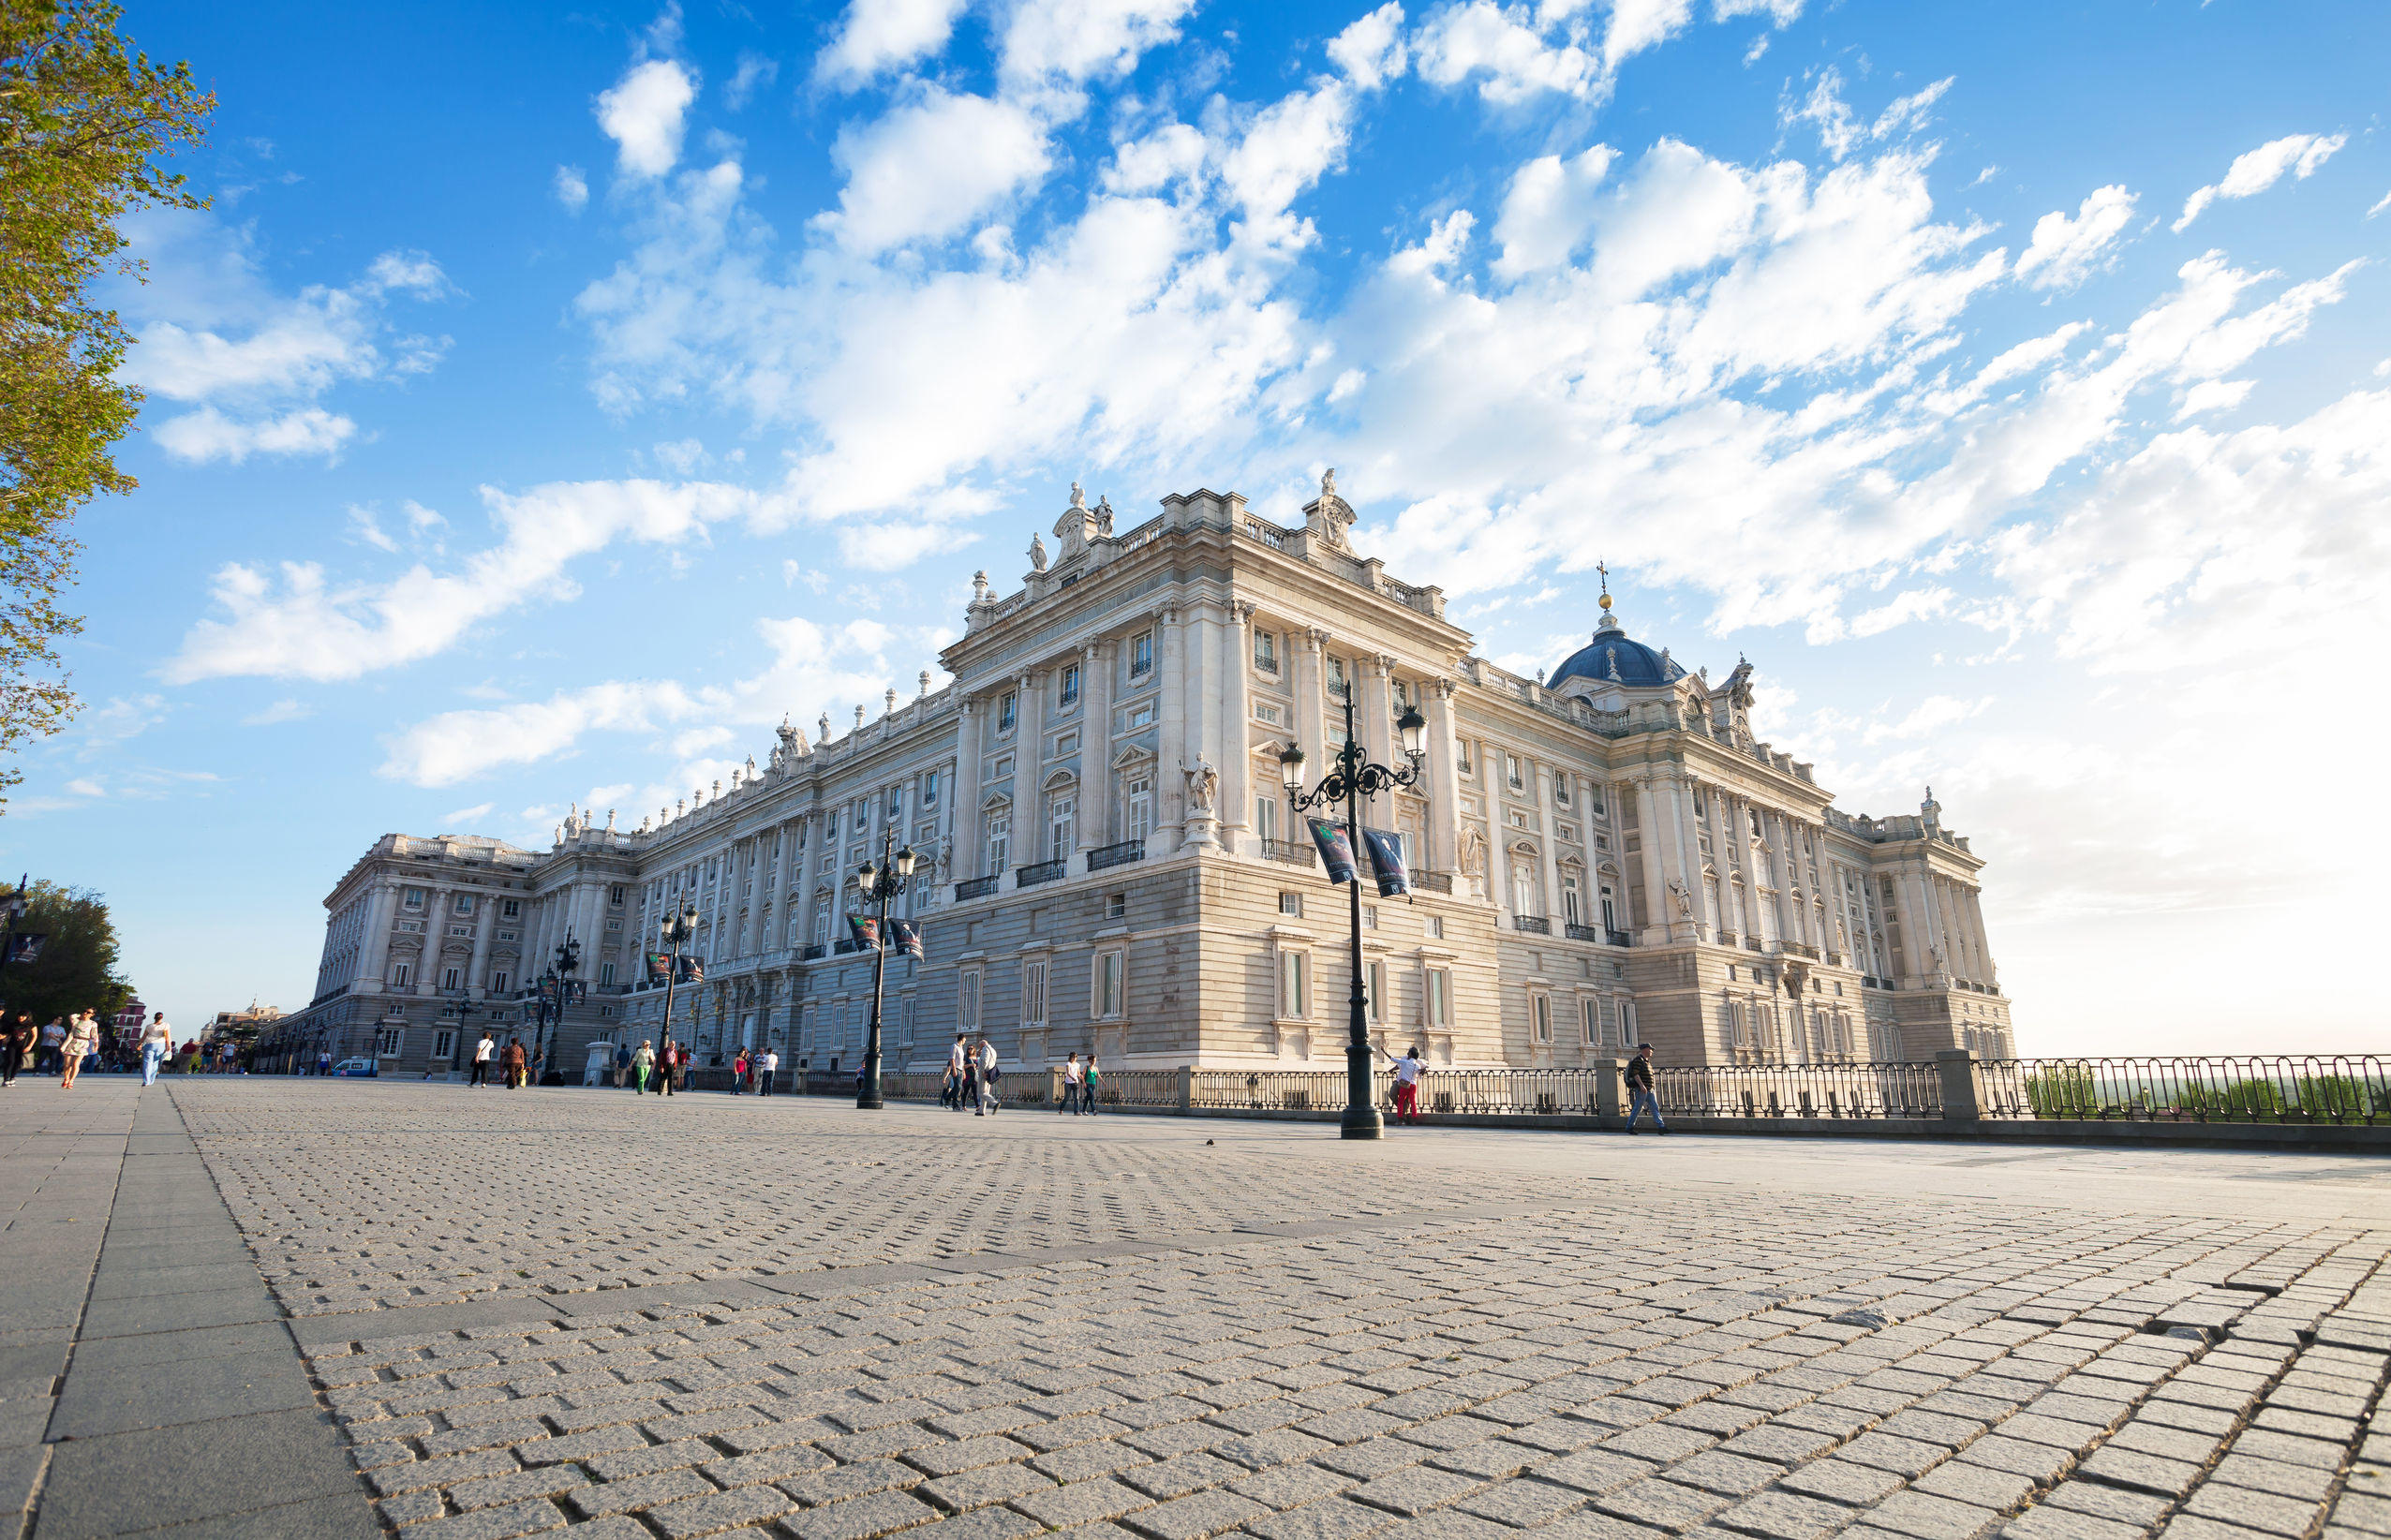 Fast Track Access to The Royal Palace